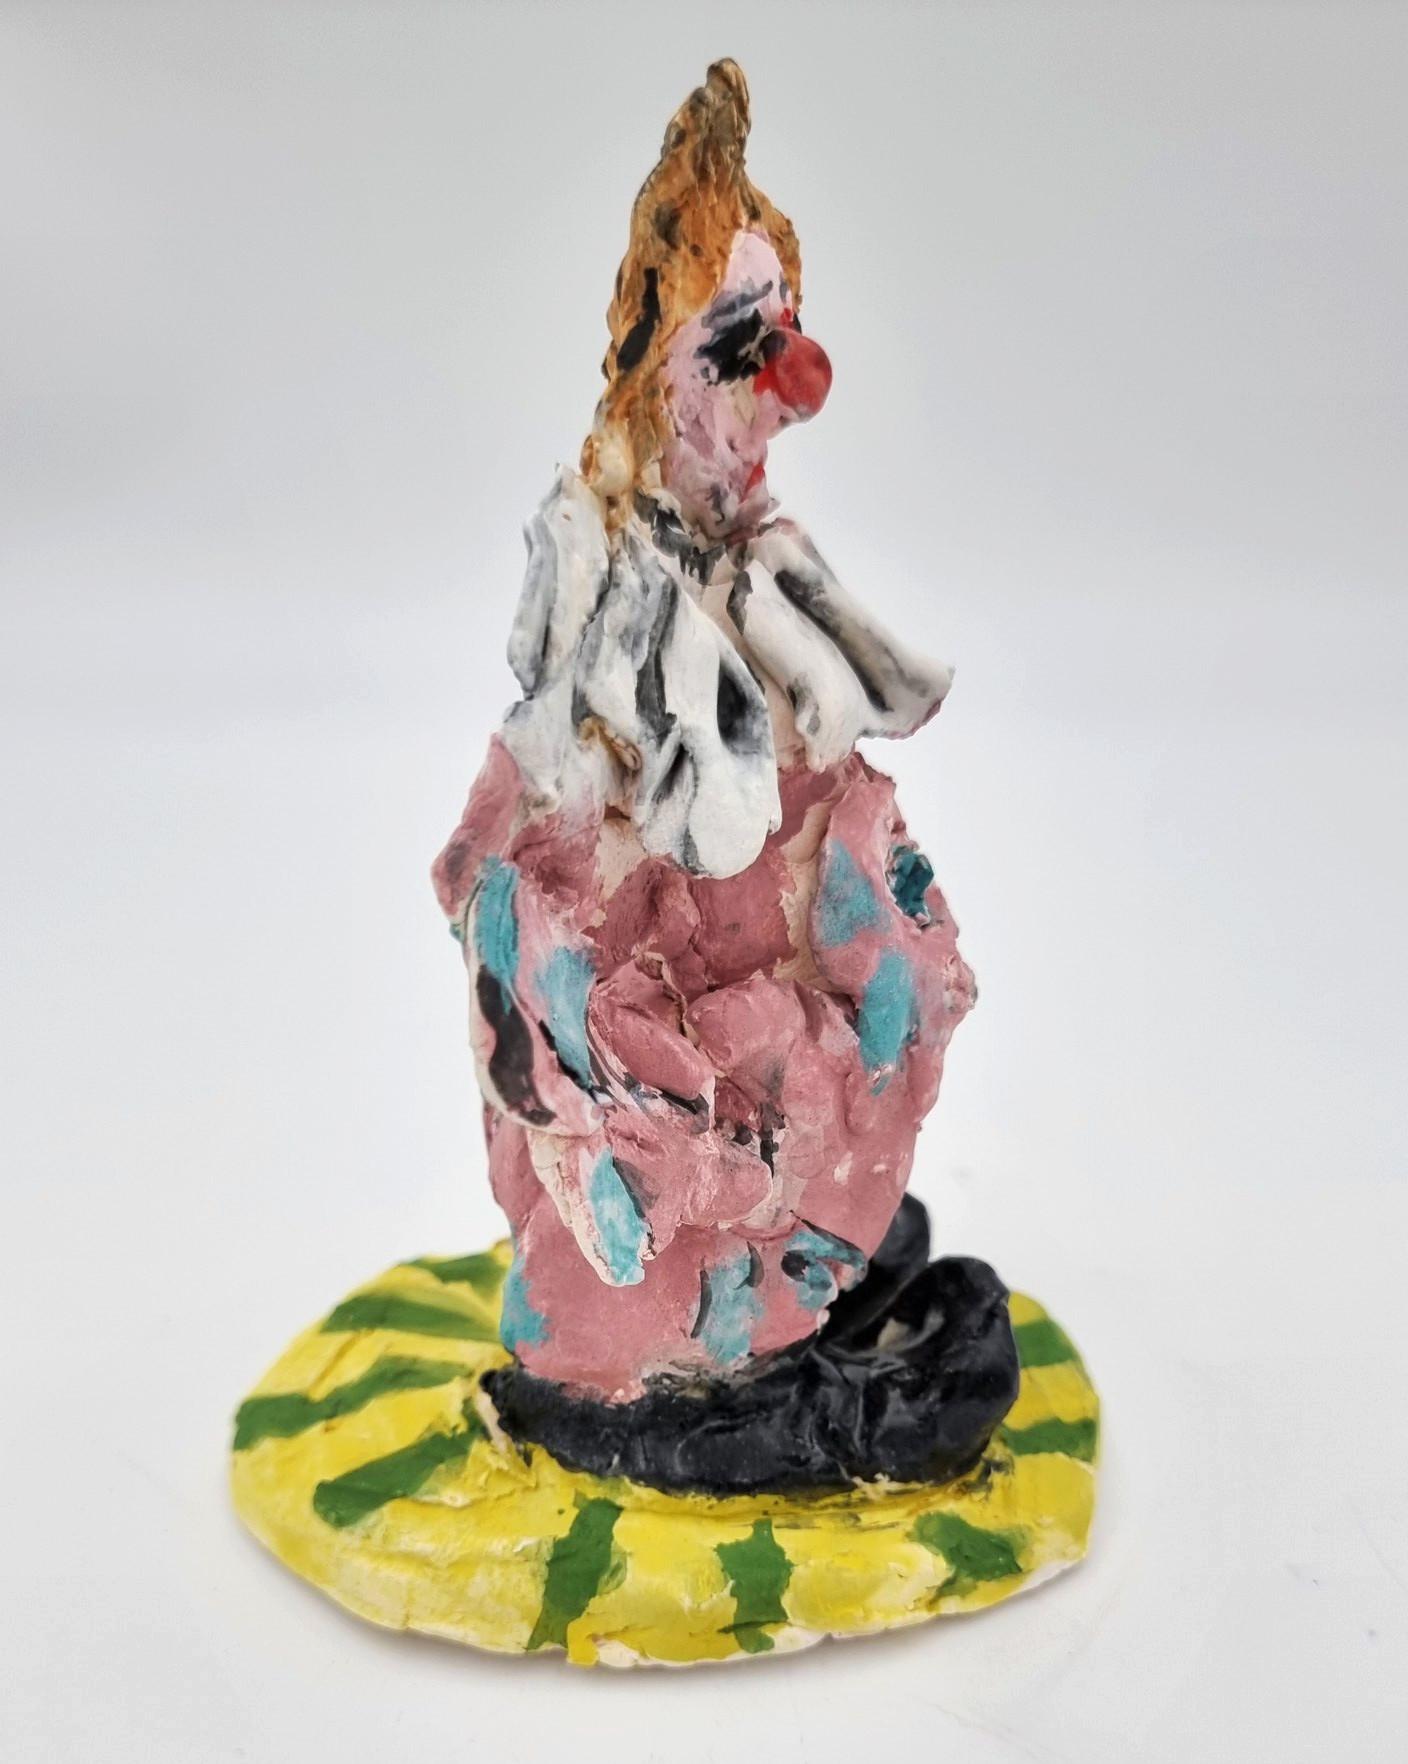 Ann Rothman
Clown (Circus, Whimsical, Viola Frey, Delicate, Playful, Fun, Cirque du Soleil, The Ringling Bros., Barnum & Bailey)
2022
Porcelain, Low Fire Glazes, Crayons, Watercolors
Fired Cone 06, 04
6 x 4.5 x 4.25 inches
COA provided
Ref.: